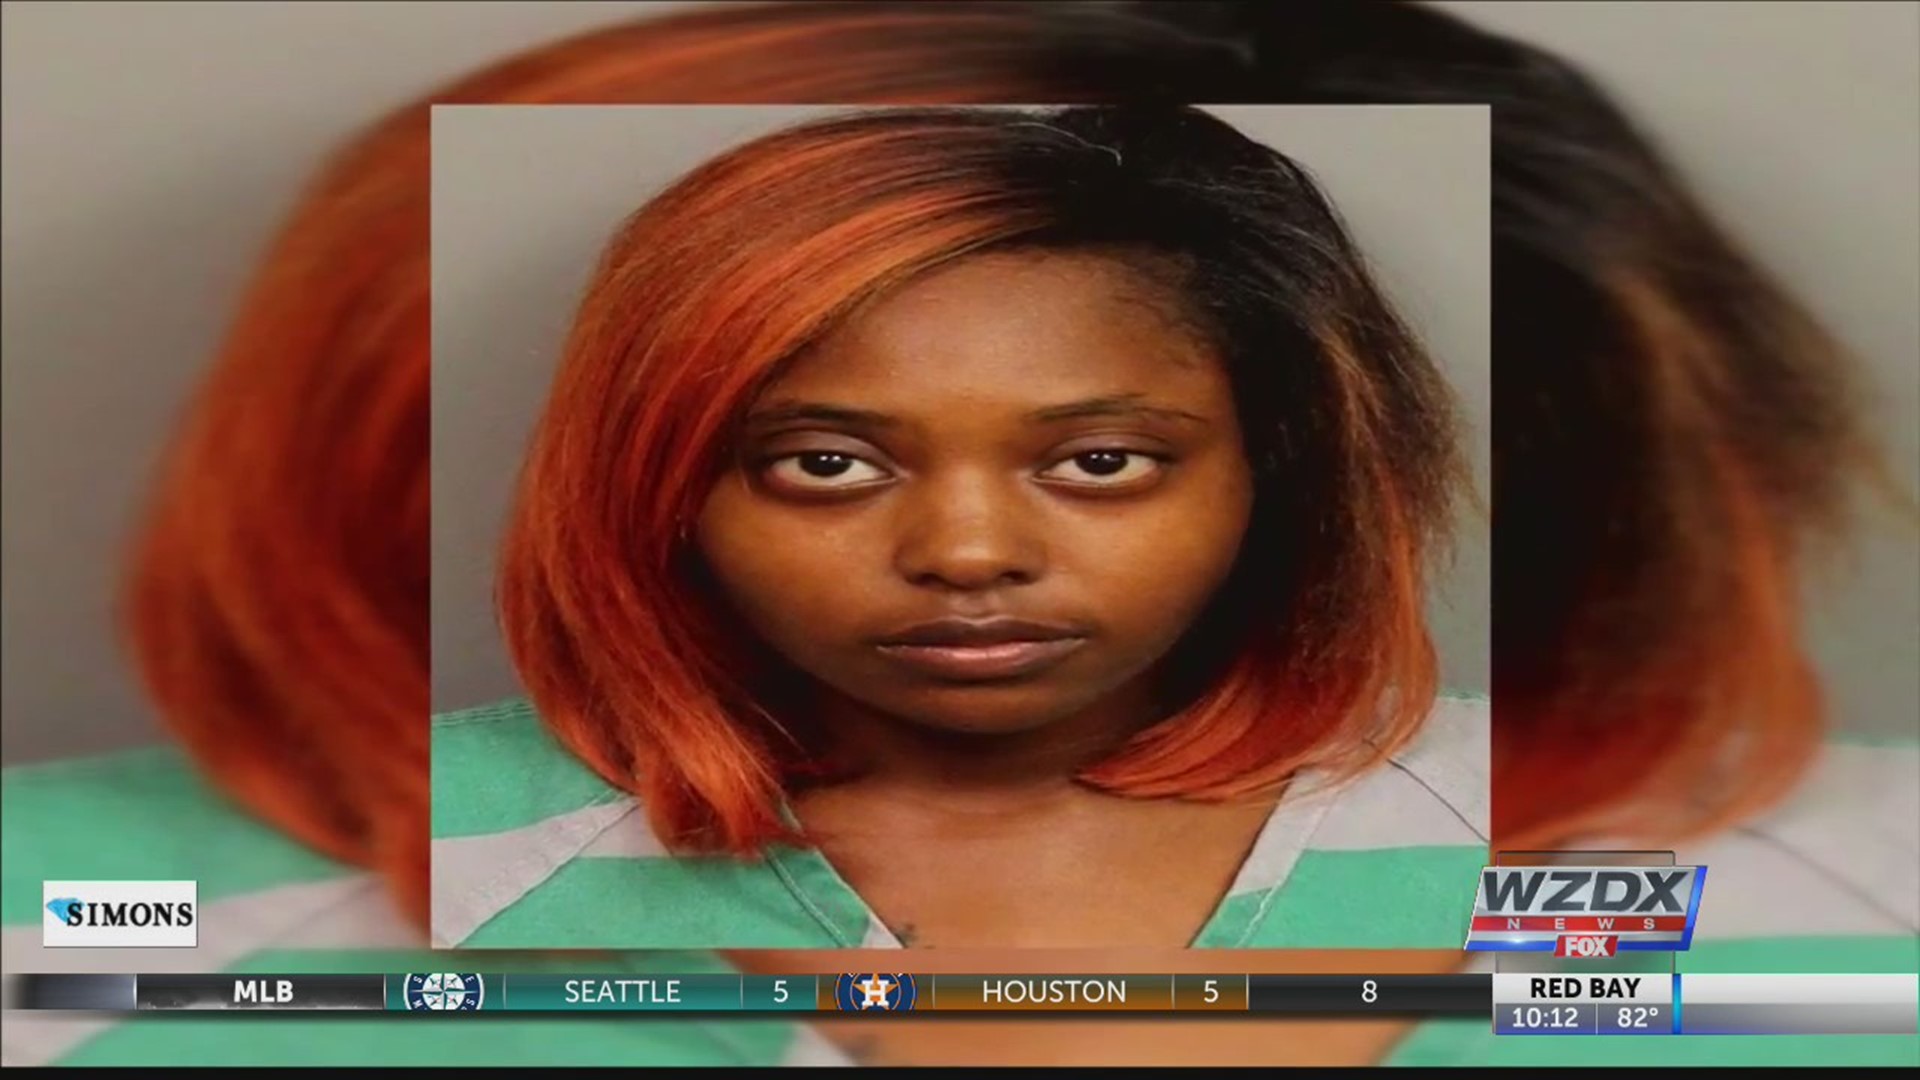 A Birmingham woman who was five months pregnant when she was shot in the stomach is the one being charged.